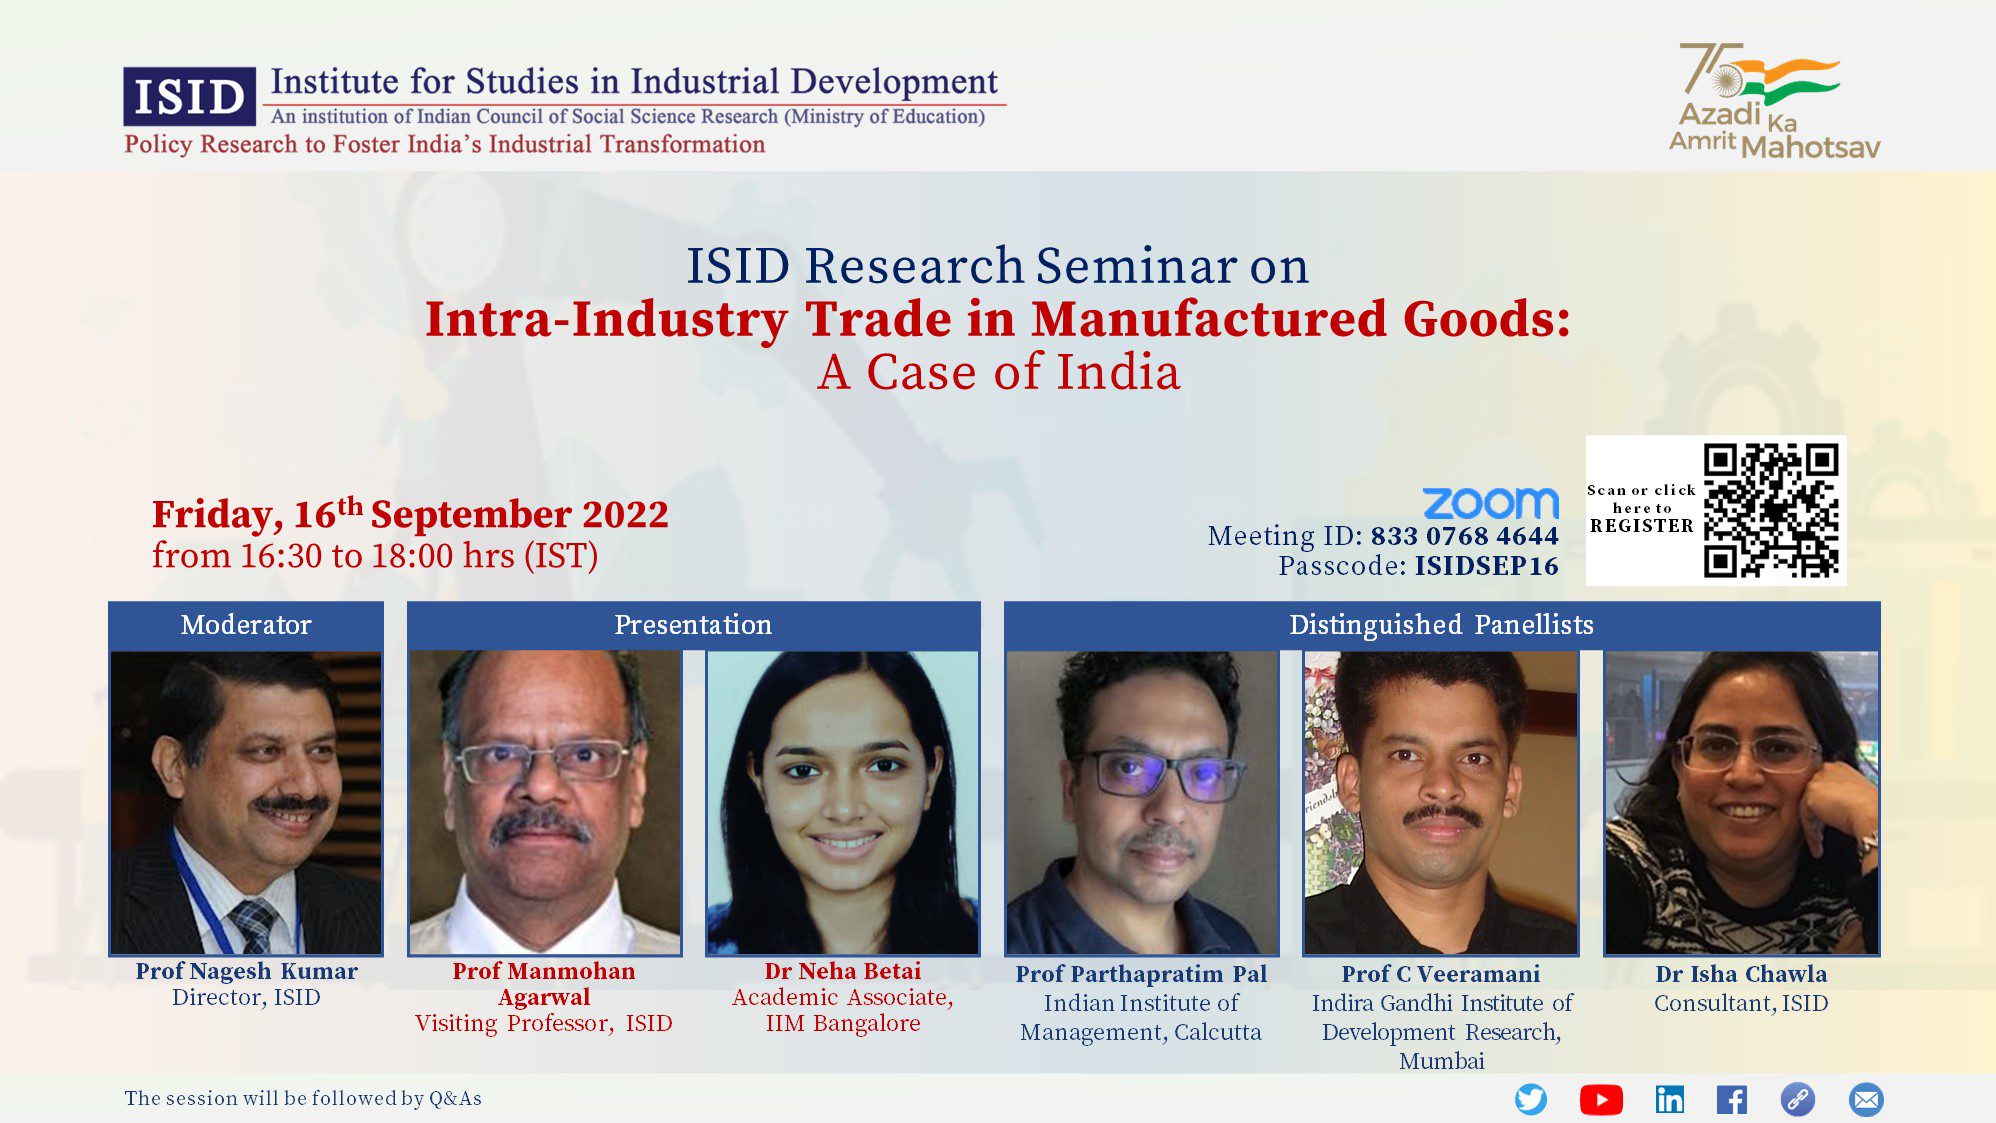 ISID Research Seminar on Intra-Industry Trade in Manufactured Goods: A Case of India